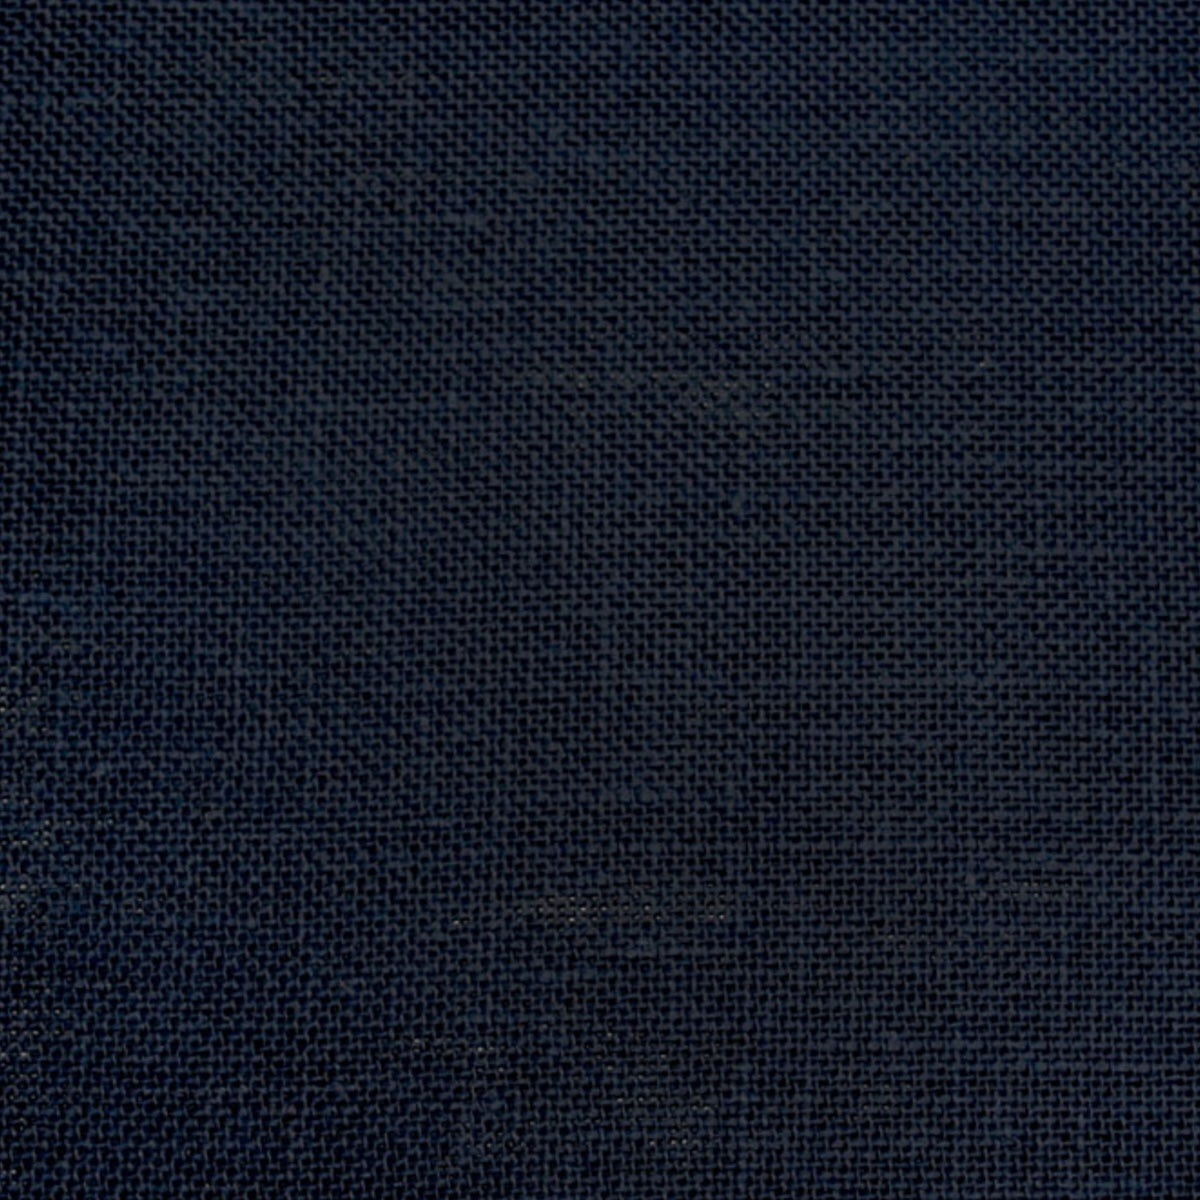 Linen 28 count - Navy - Sewfinity.com